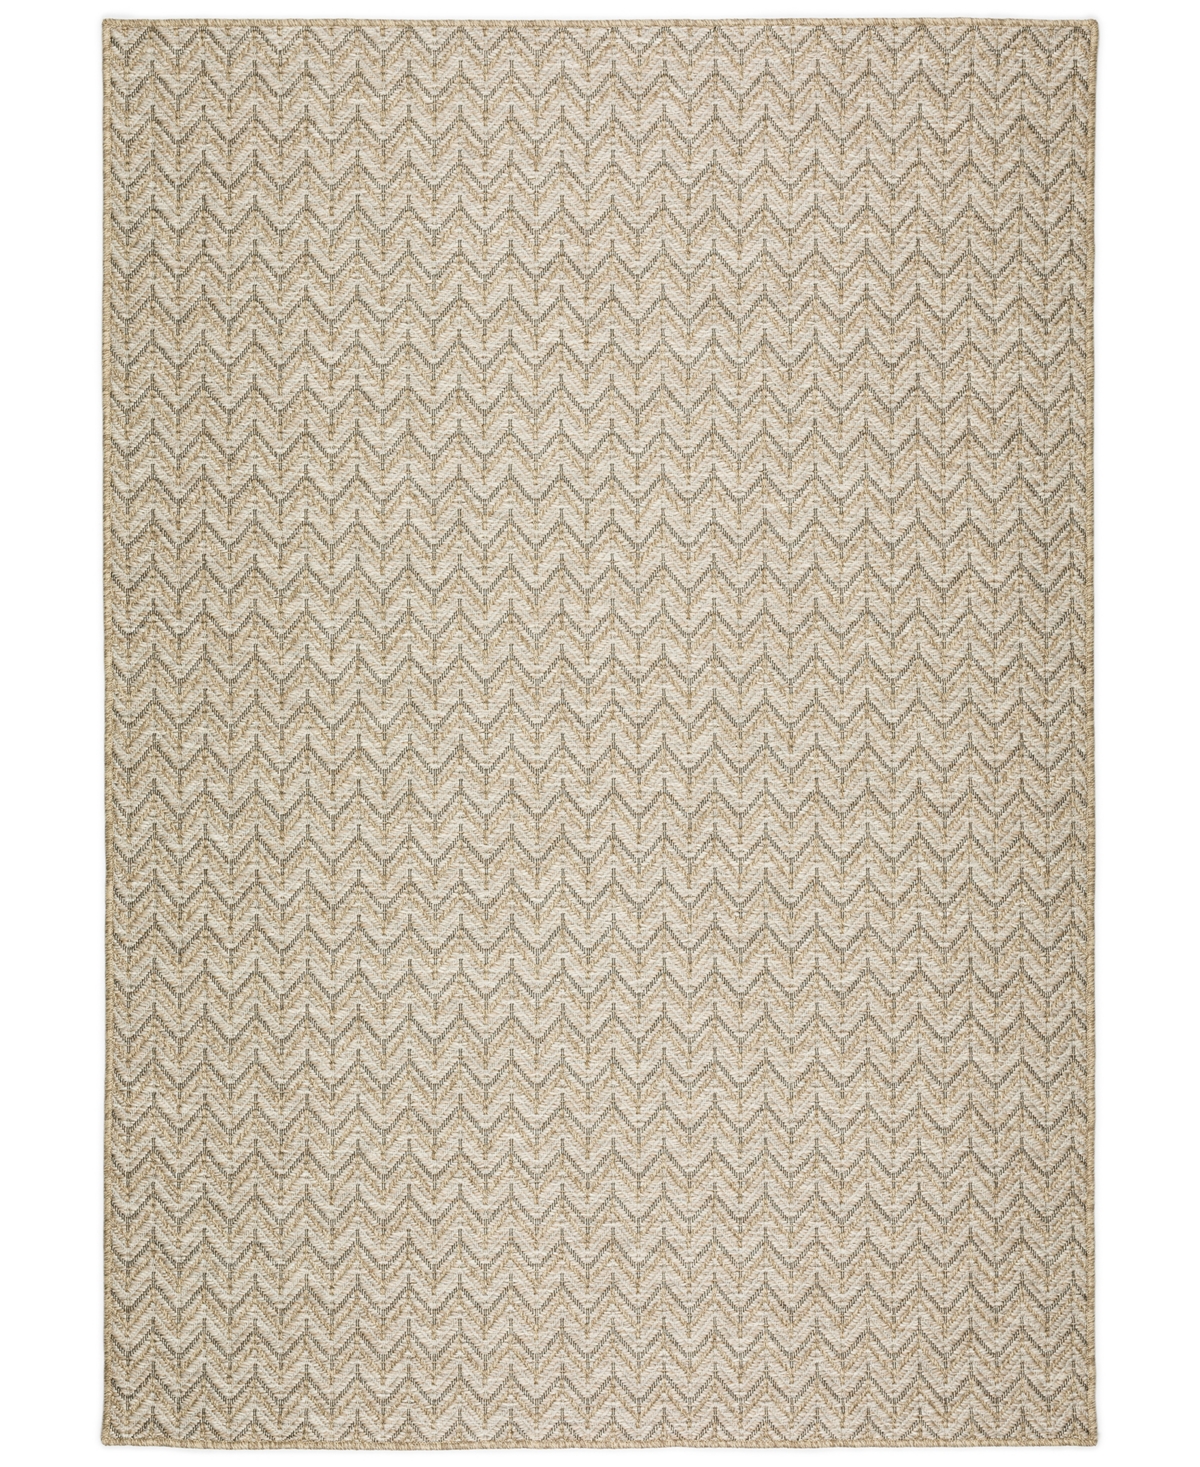 D Style Nusa Outdoor Nsa1 1'8" X 2'6" Area Rug In Beige